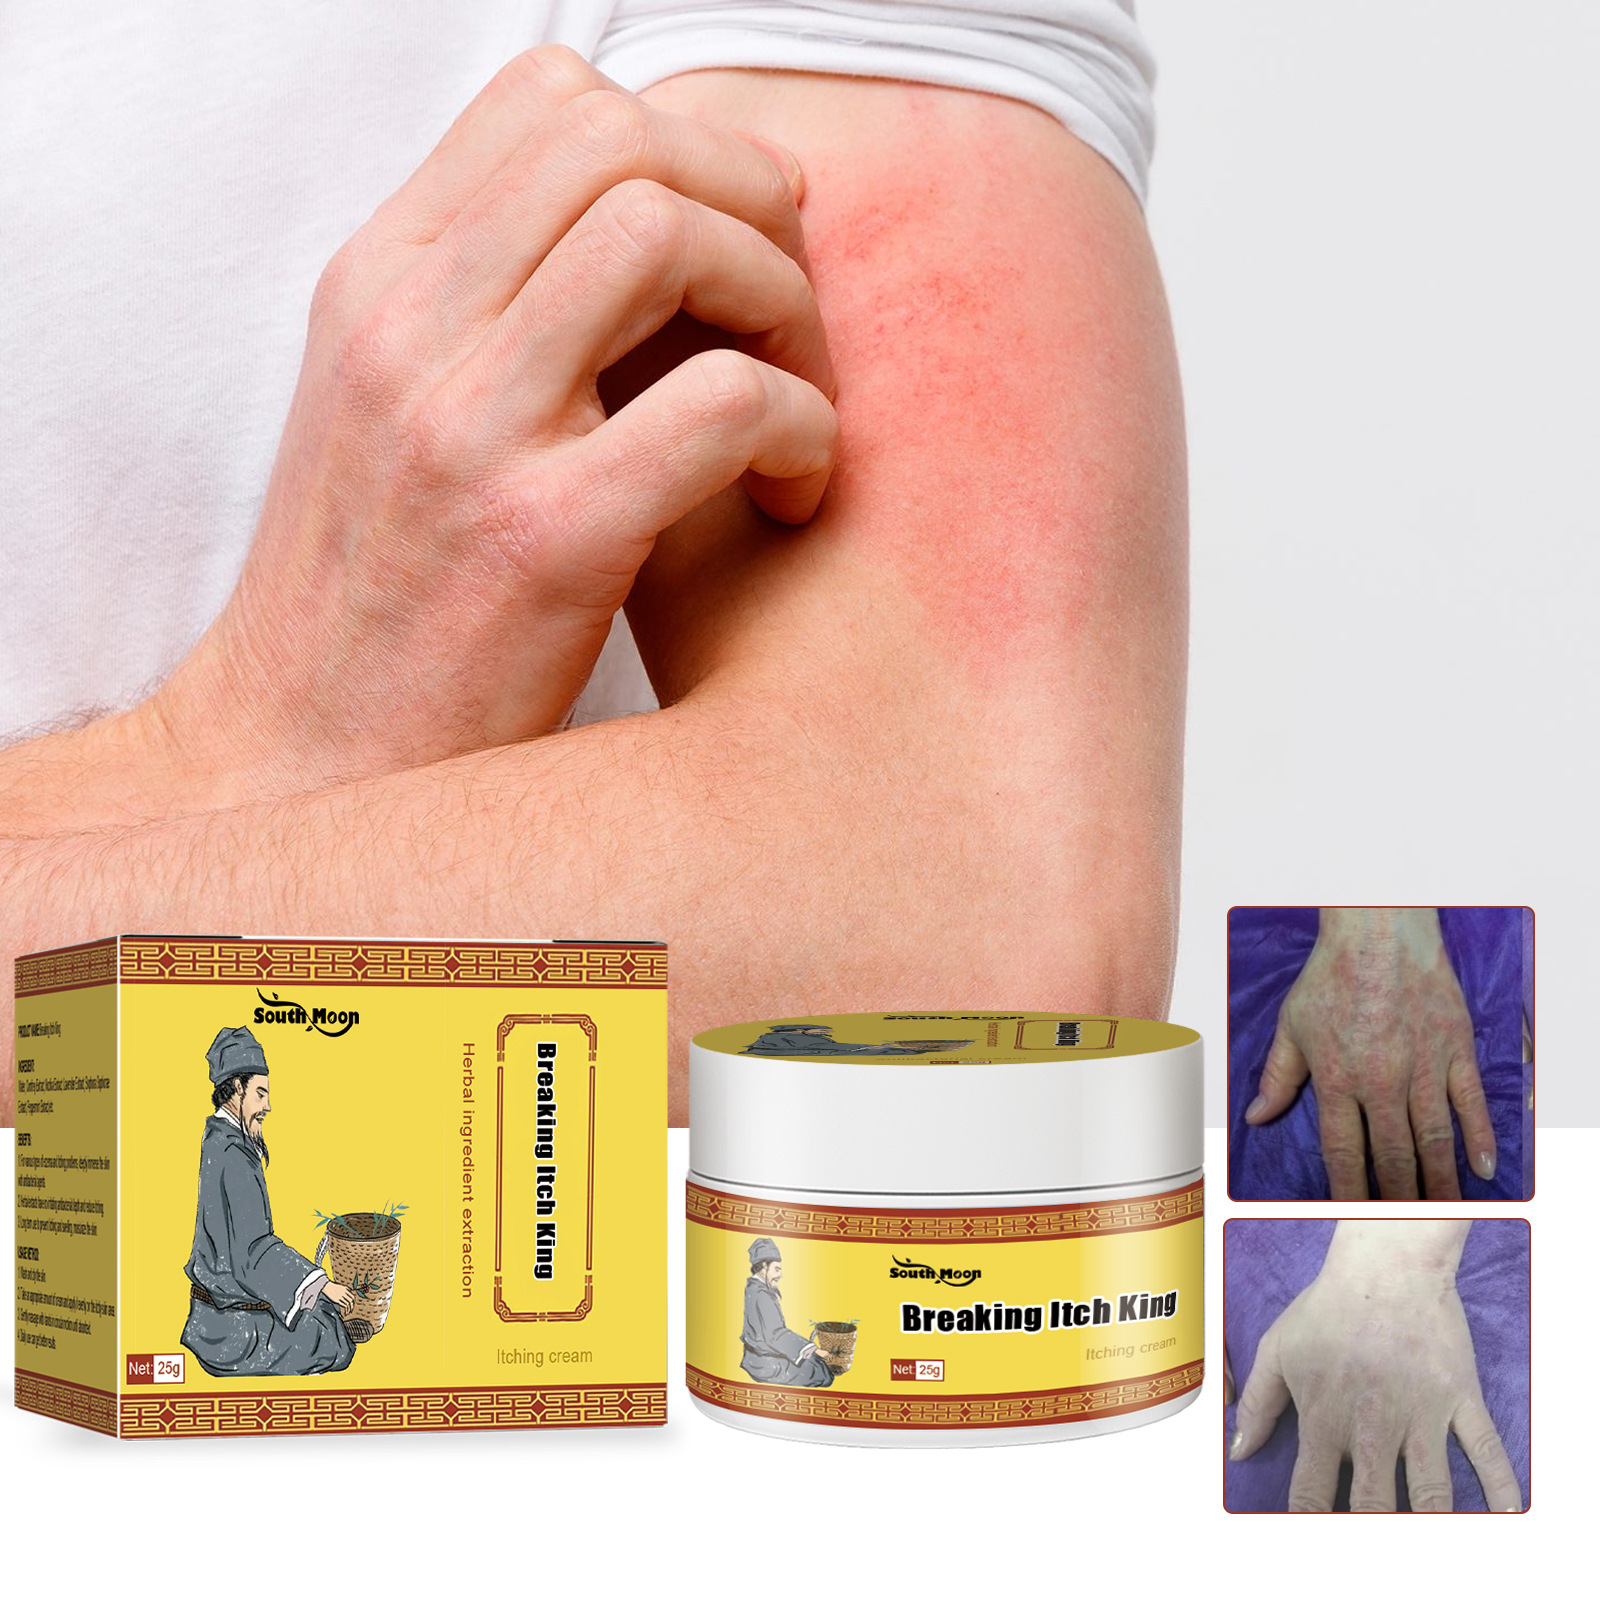 South Moon Anti-Itch Ointment Relieve Hand and Foot Moss Skin Moss Redness Repair Skin Itching Skin Care Cream